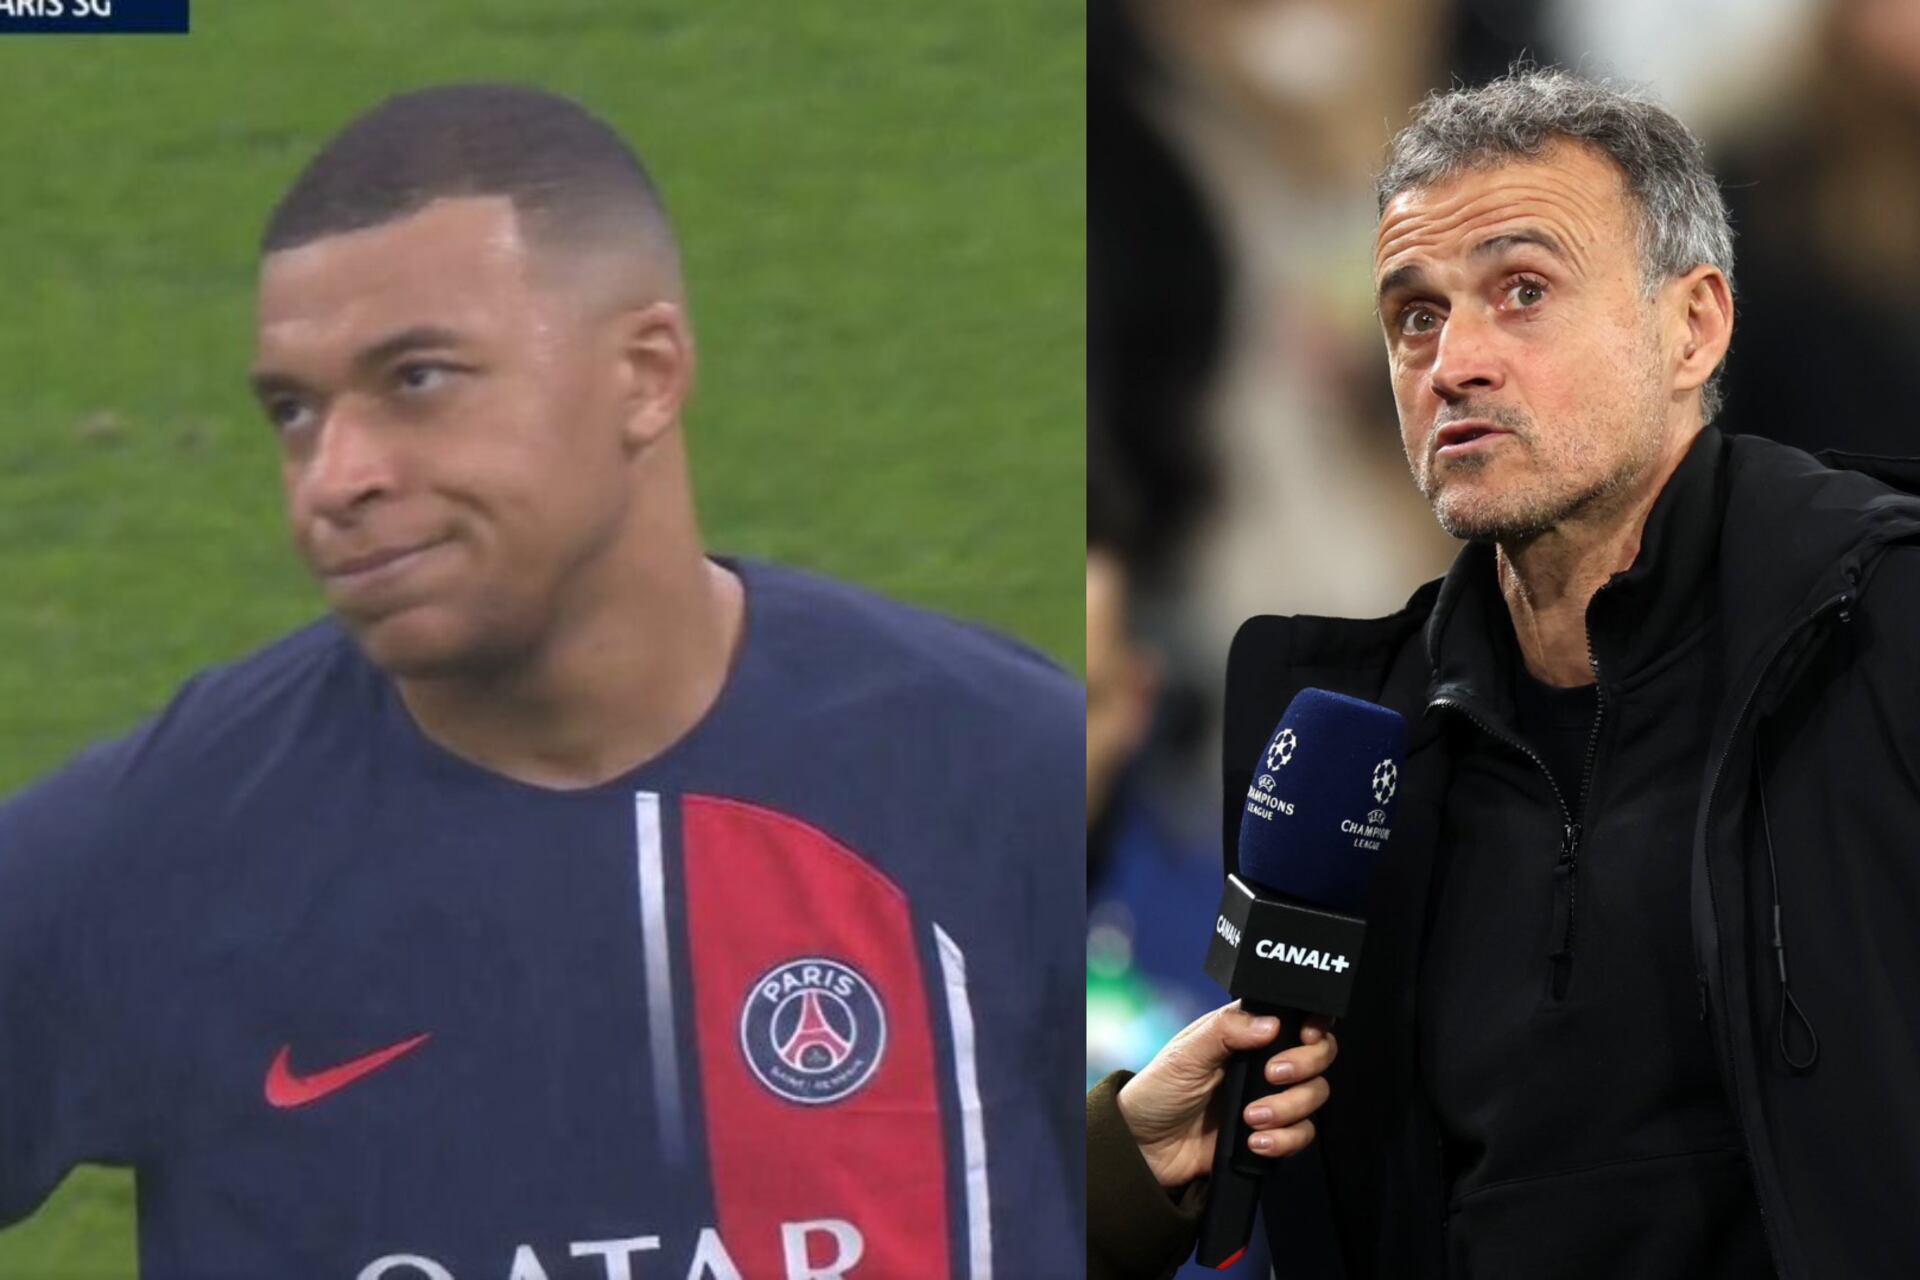 (VIDEO) Kylian Mbappé's reaction when he was subbed off from a PSG game again